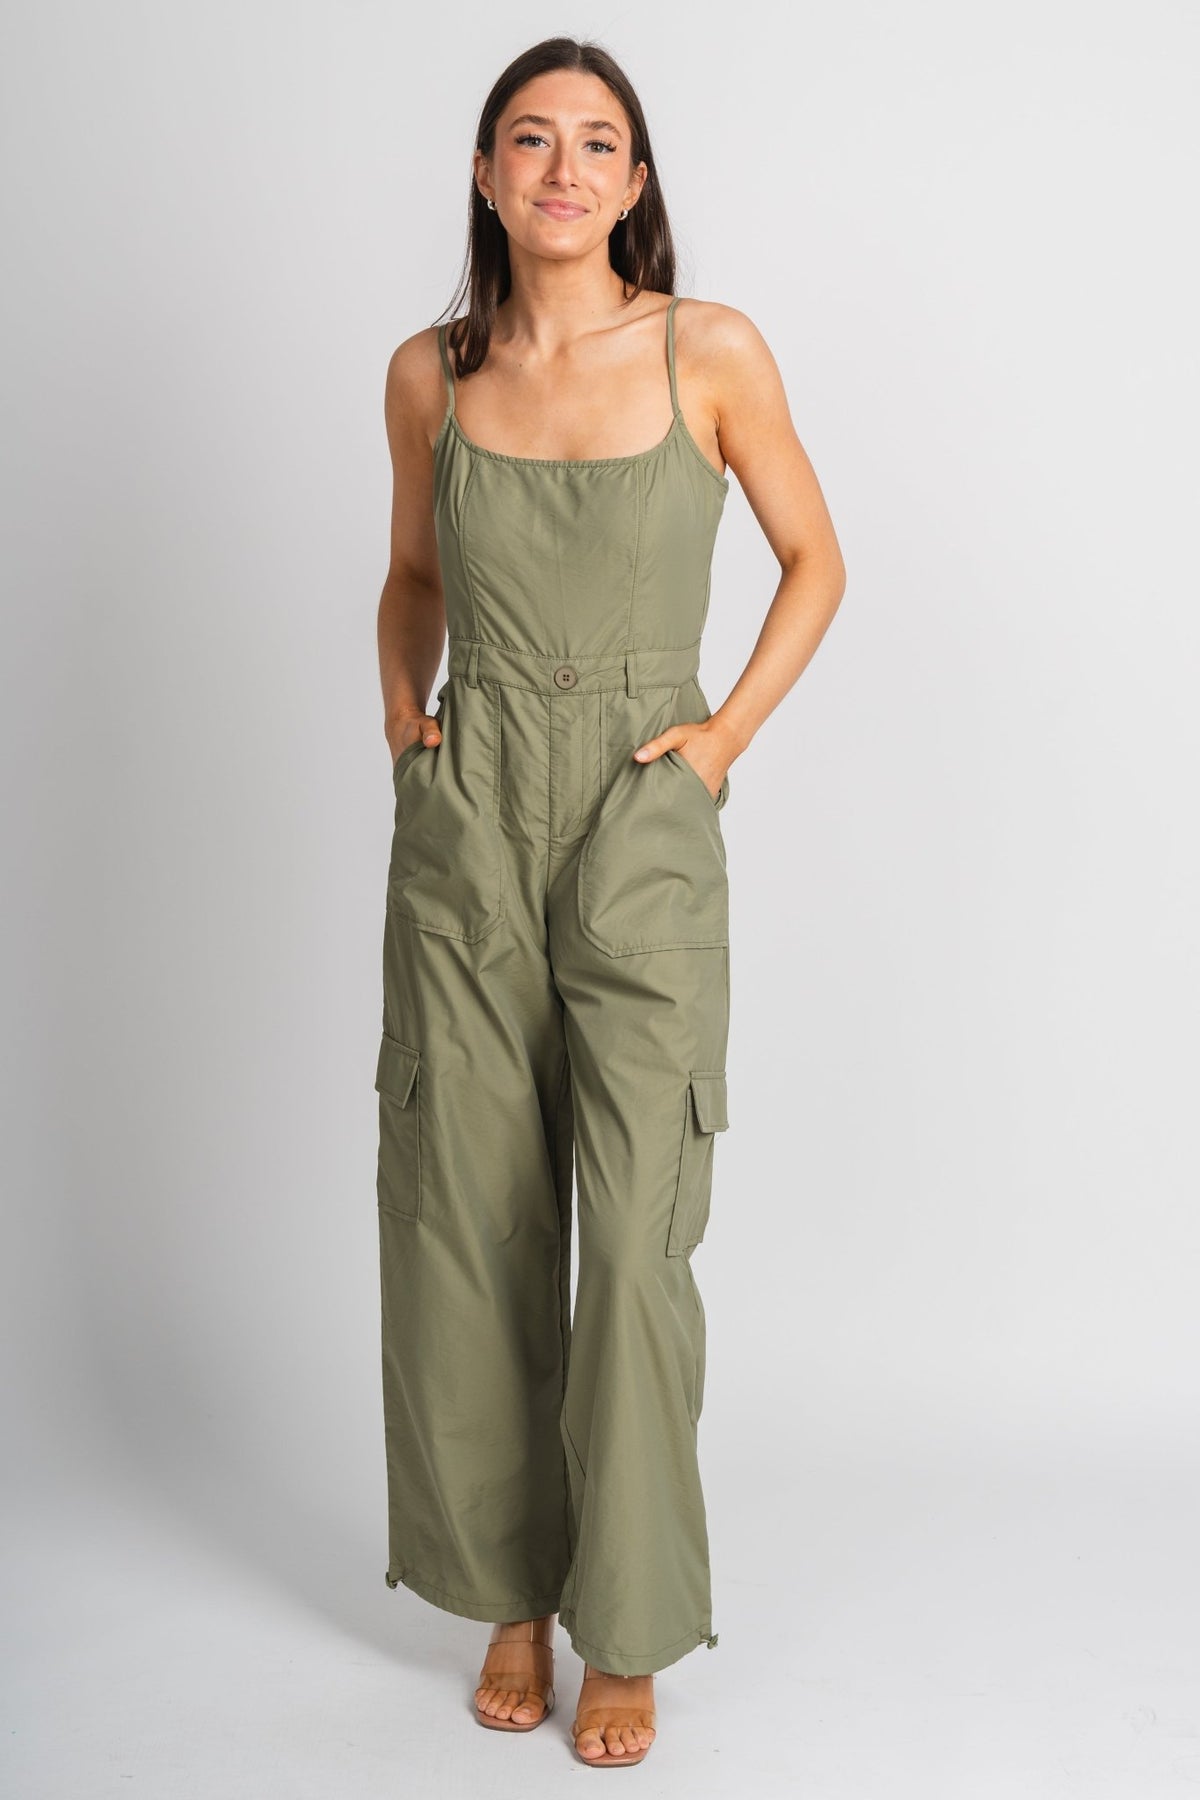 Cargo jumpsuit light olive - Cute jumpsuit - Trendy Rompers and Pantsuits at Lush Fashion Lounge Boutique in Oklahoma City